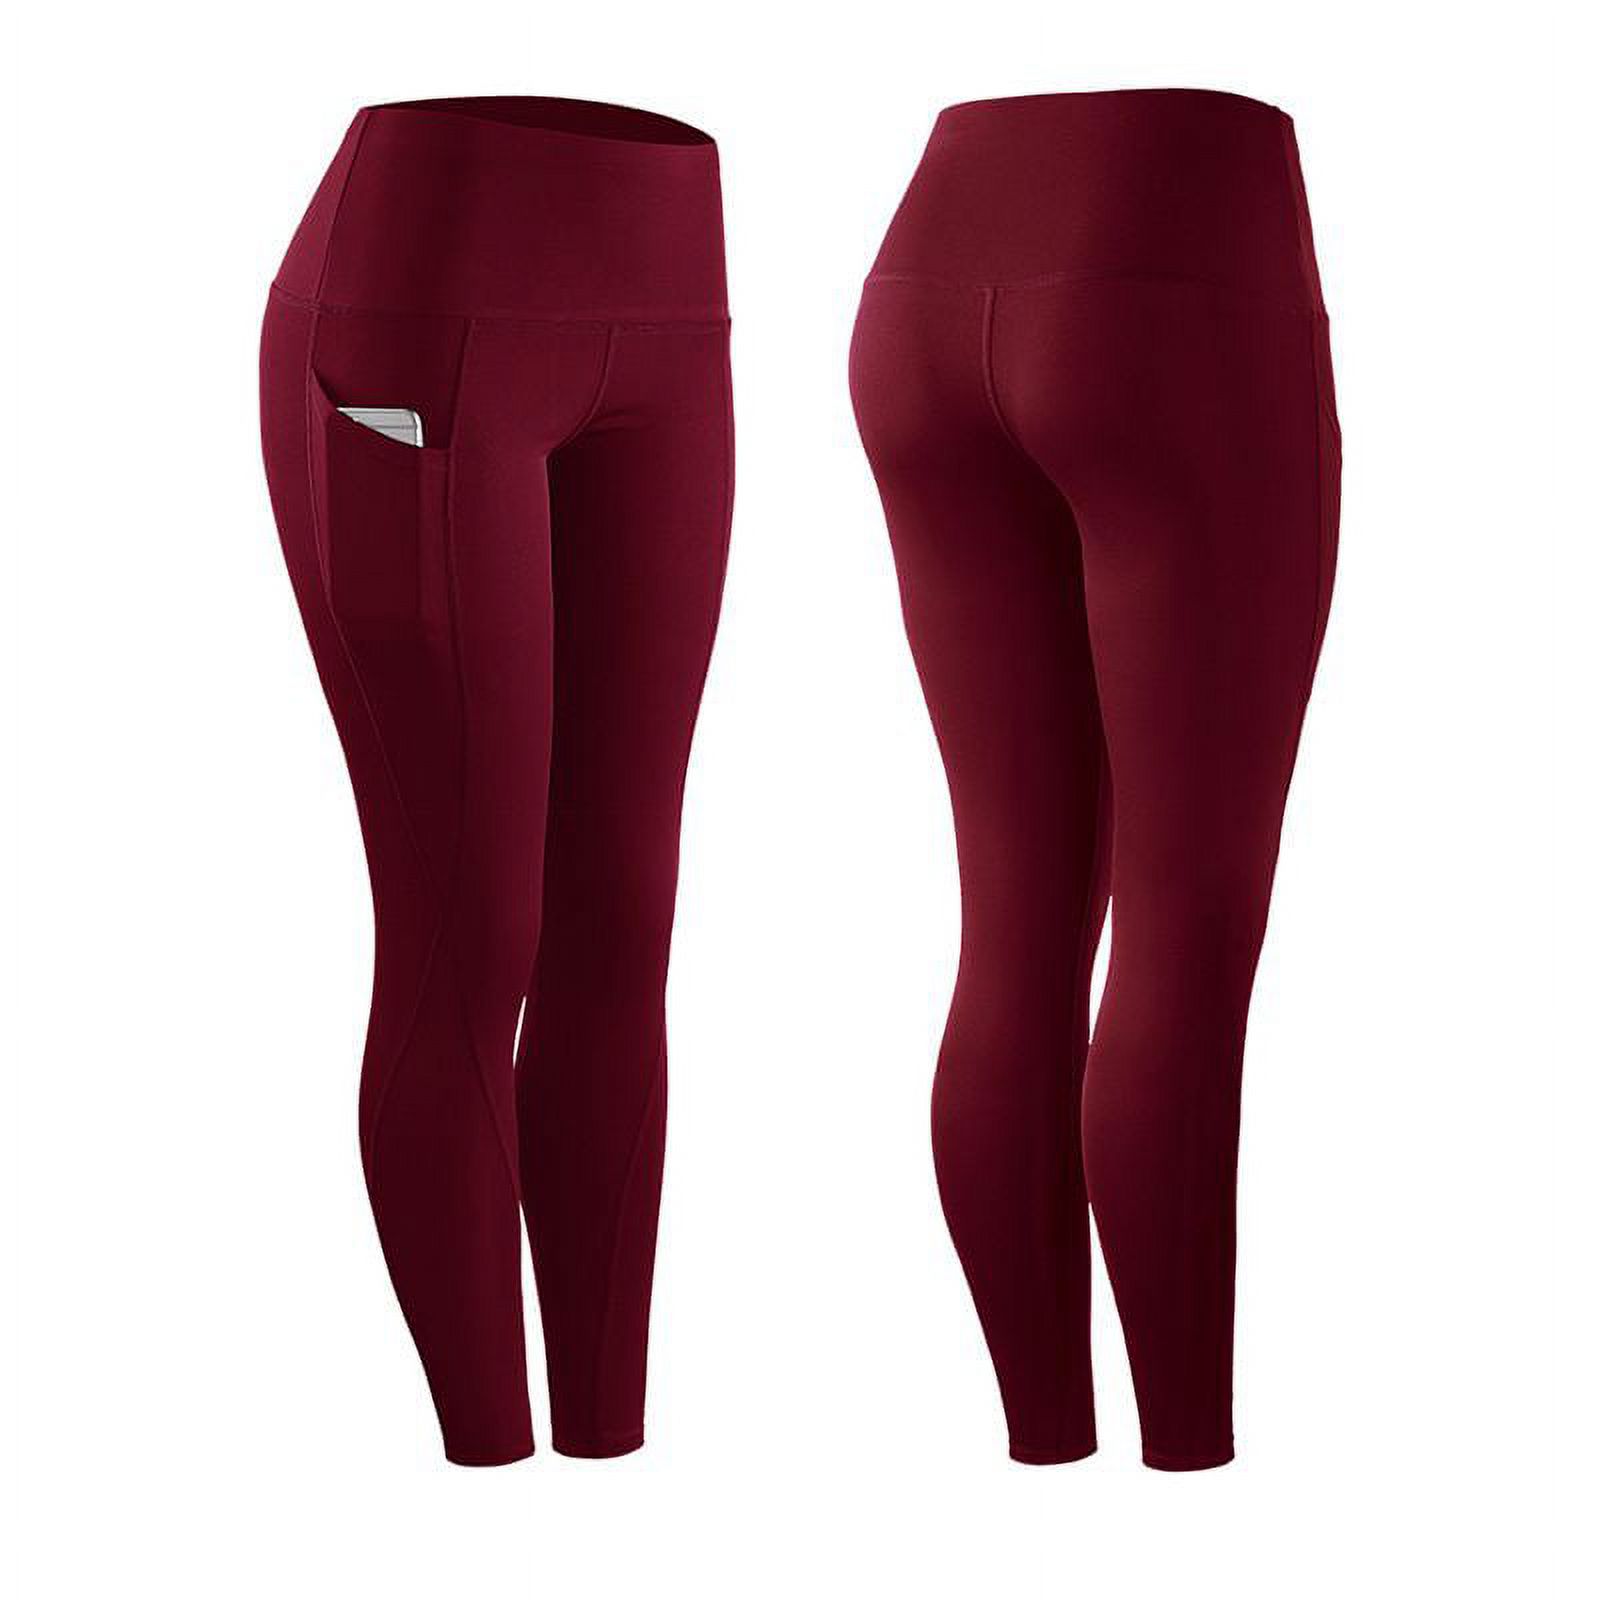 Women High Elastic Leggings Pant Solid Stretch Compression Sportswear Casual Yoga Jogging Leggings Pants With Pocket - image 2 of 2